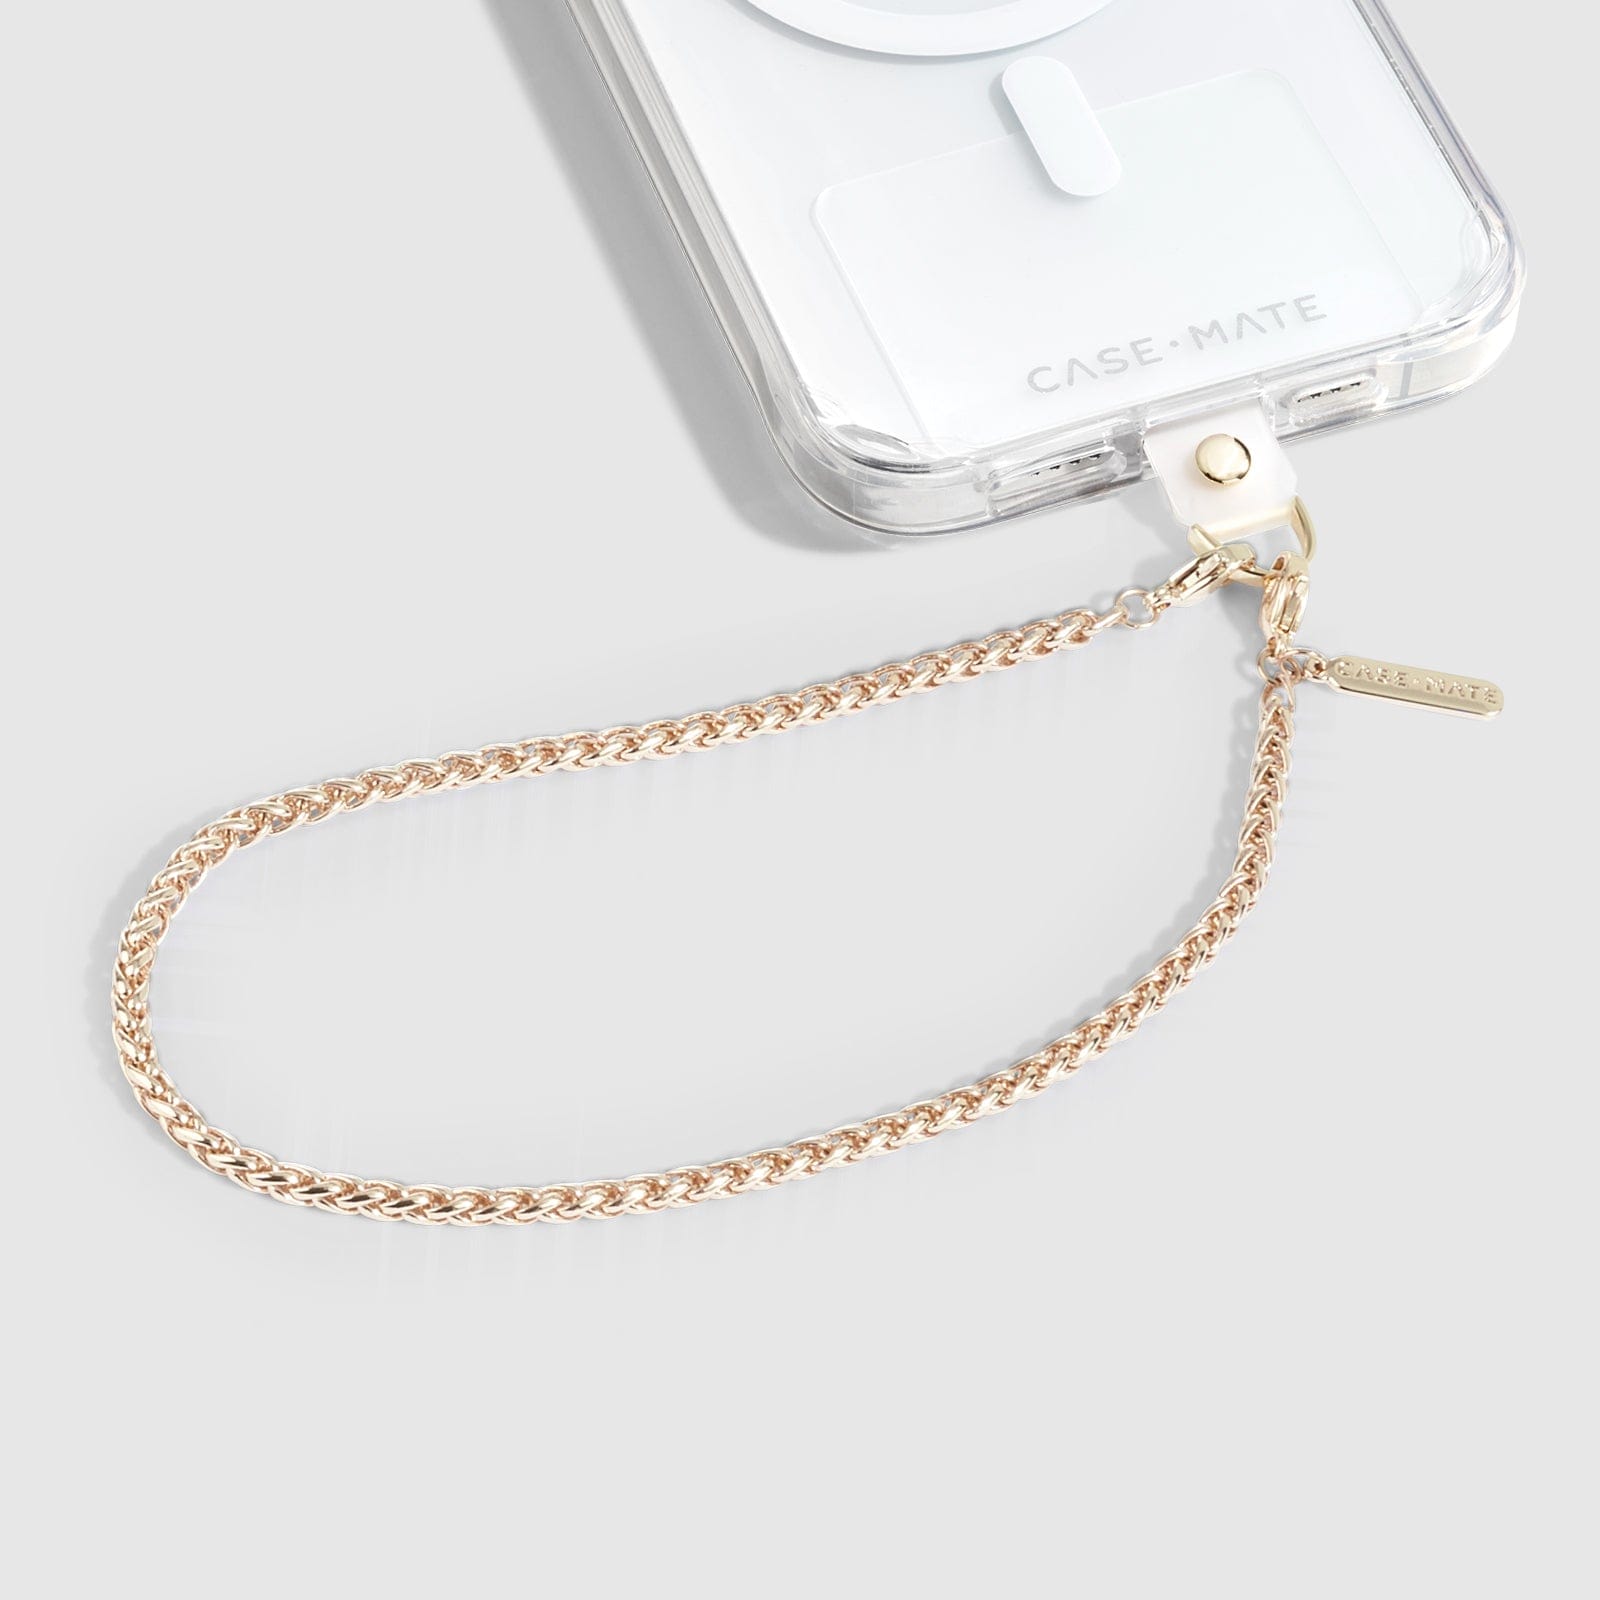 Case-Mate Phone Charm with Gold Metal Chain - Detachable Phone Lanyard,  Hands-Free Wrist Strap, Adjustable Phone Strap Grip, Accessory for Women 